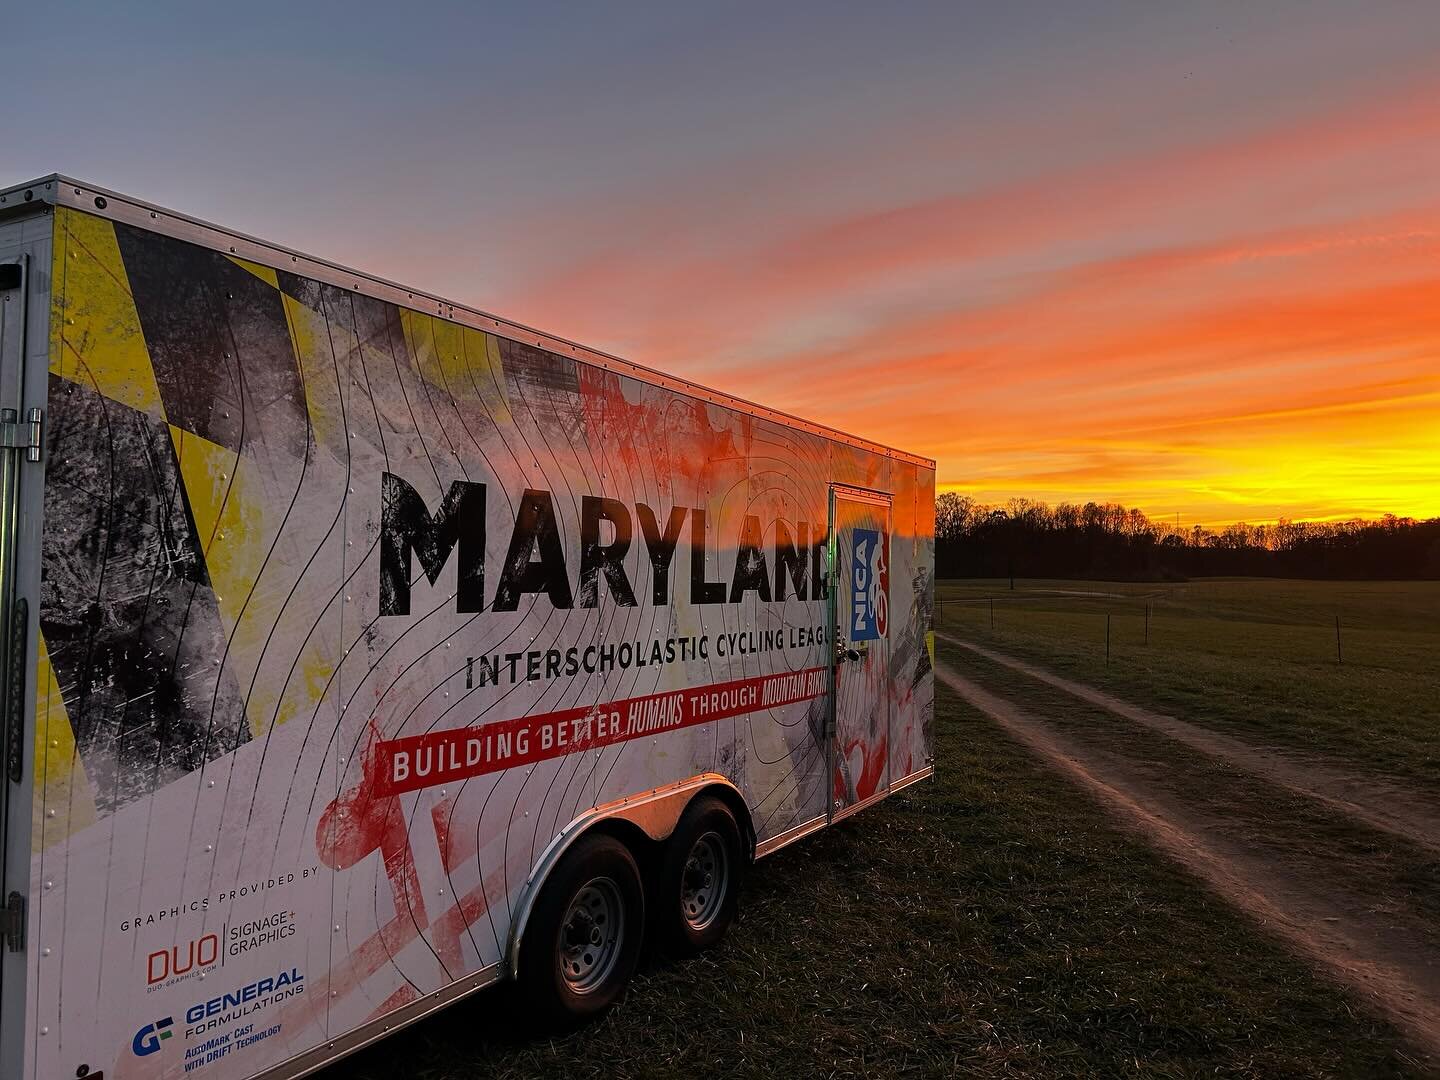 Lots of friends pulling into Fair Hill this week - it is going to be a beautiful time with so many NICA friends together!

This 🌅 is making our @general_formulations wrapped trailer look like a real work of art!

Can't wait to see you here at Fair H